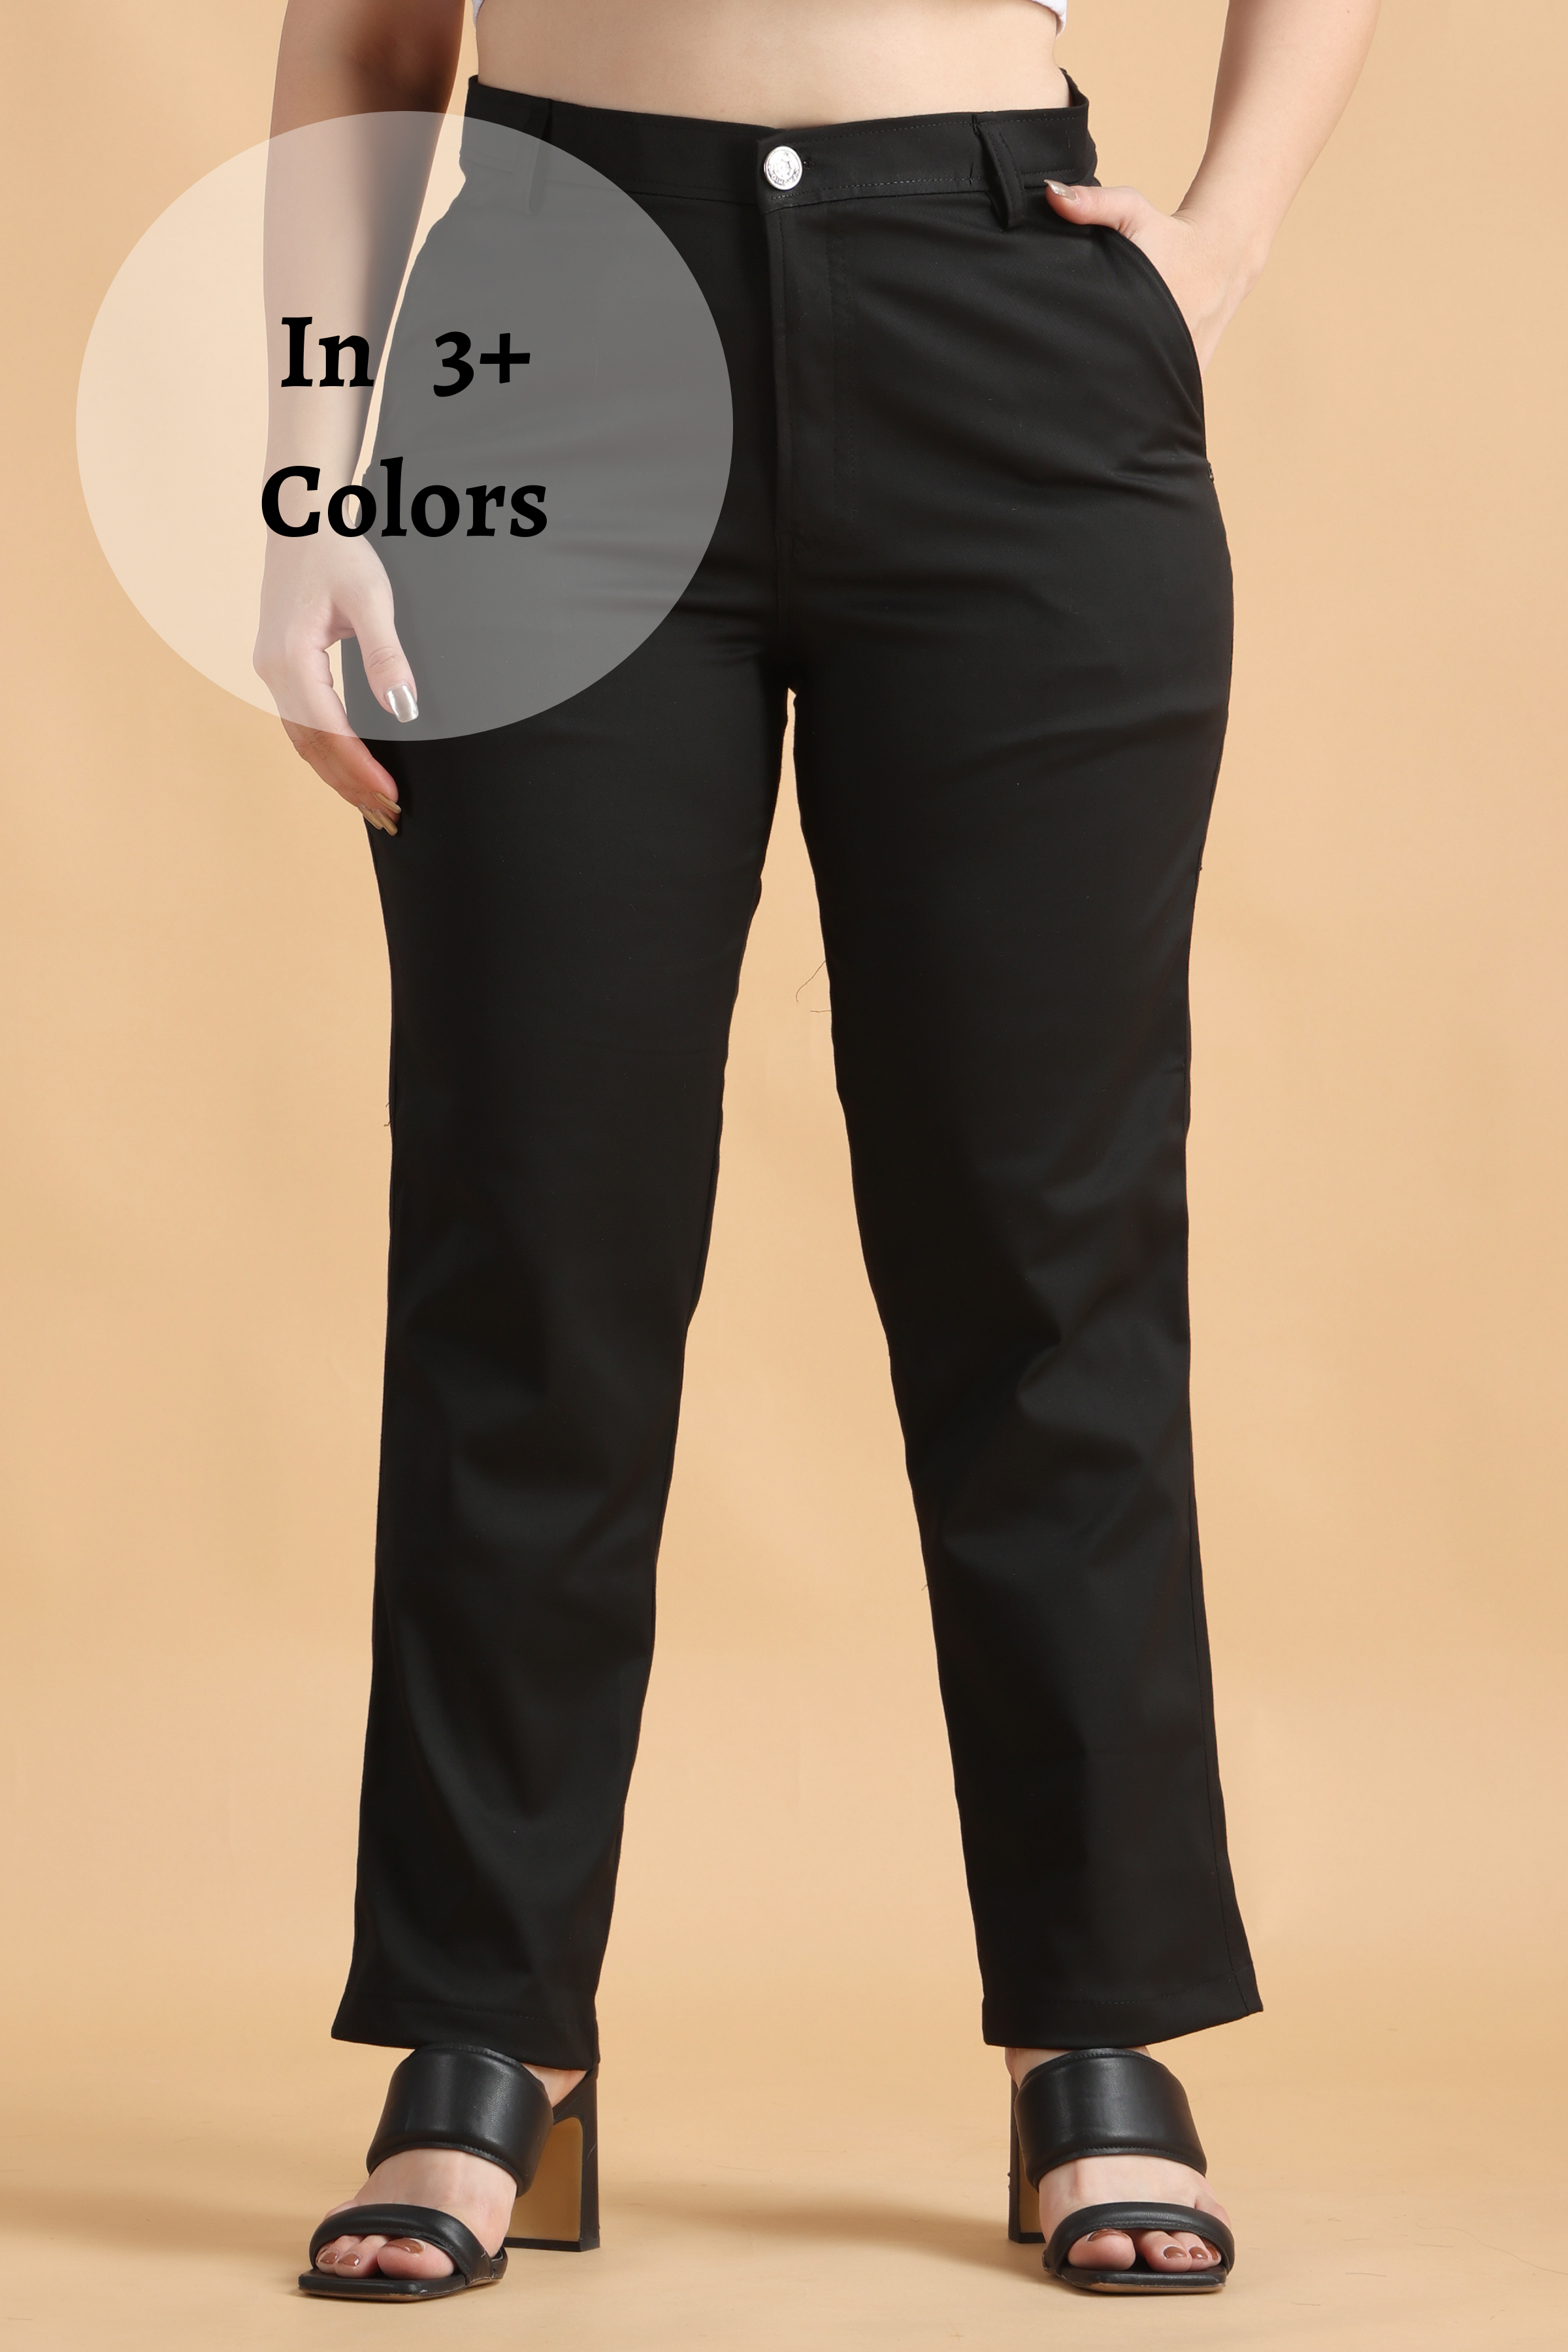 fcity.in - Noohy Stretchable Formal Pants For Men Stylish Slim Fit Men Wear